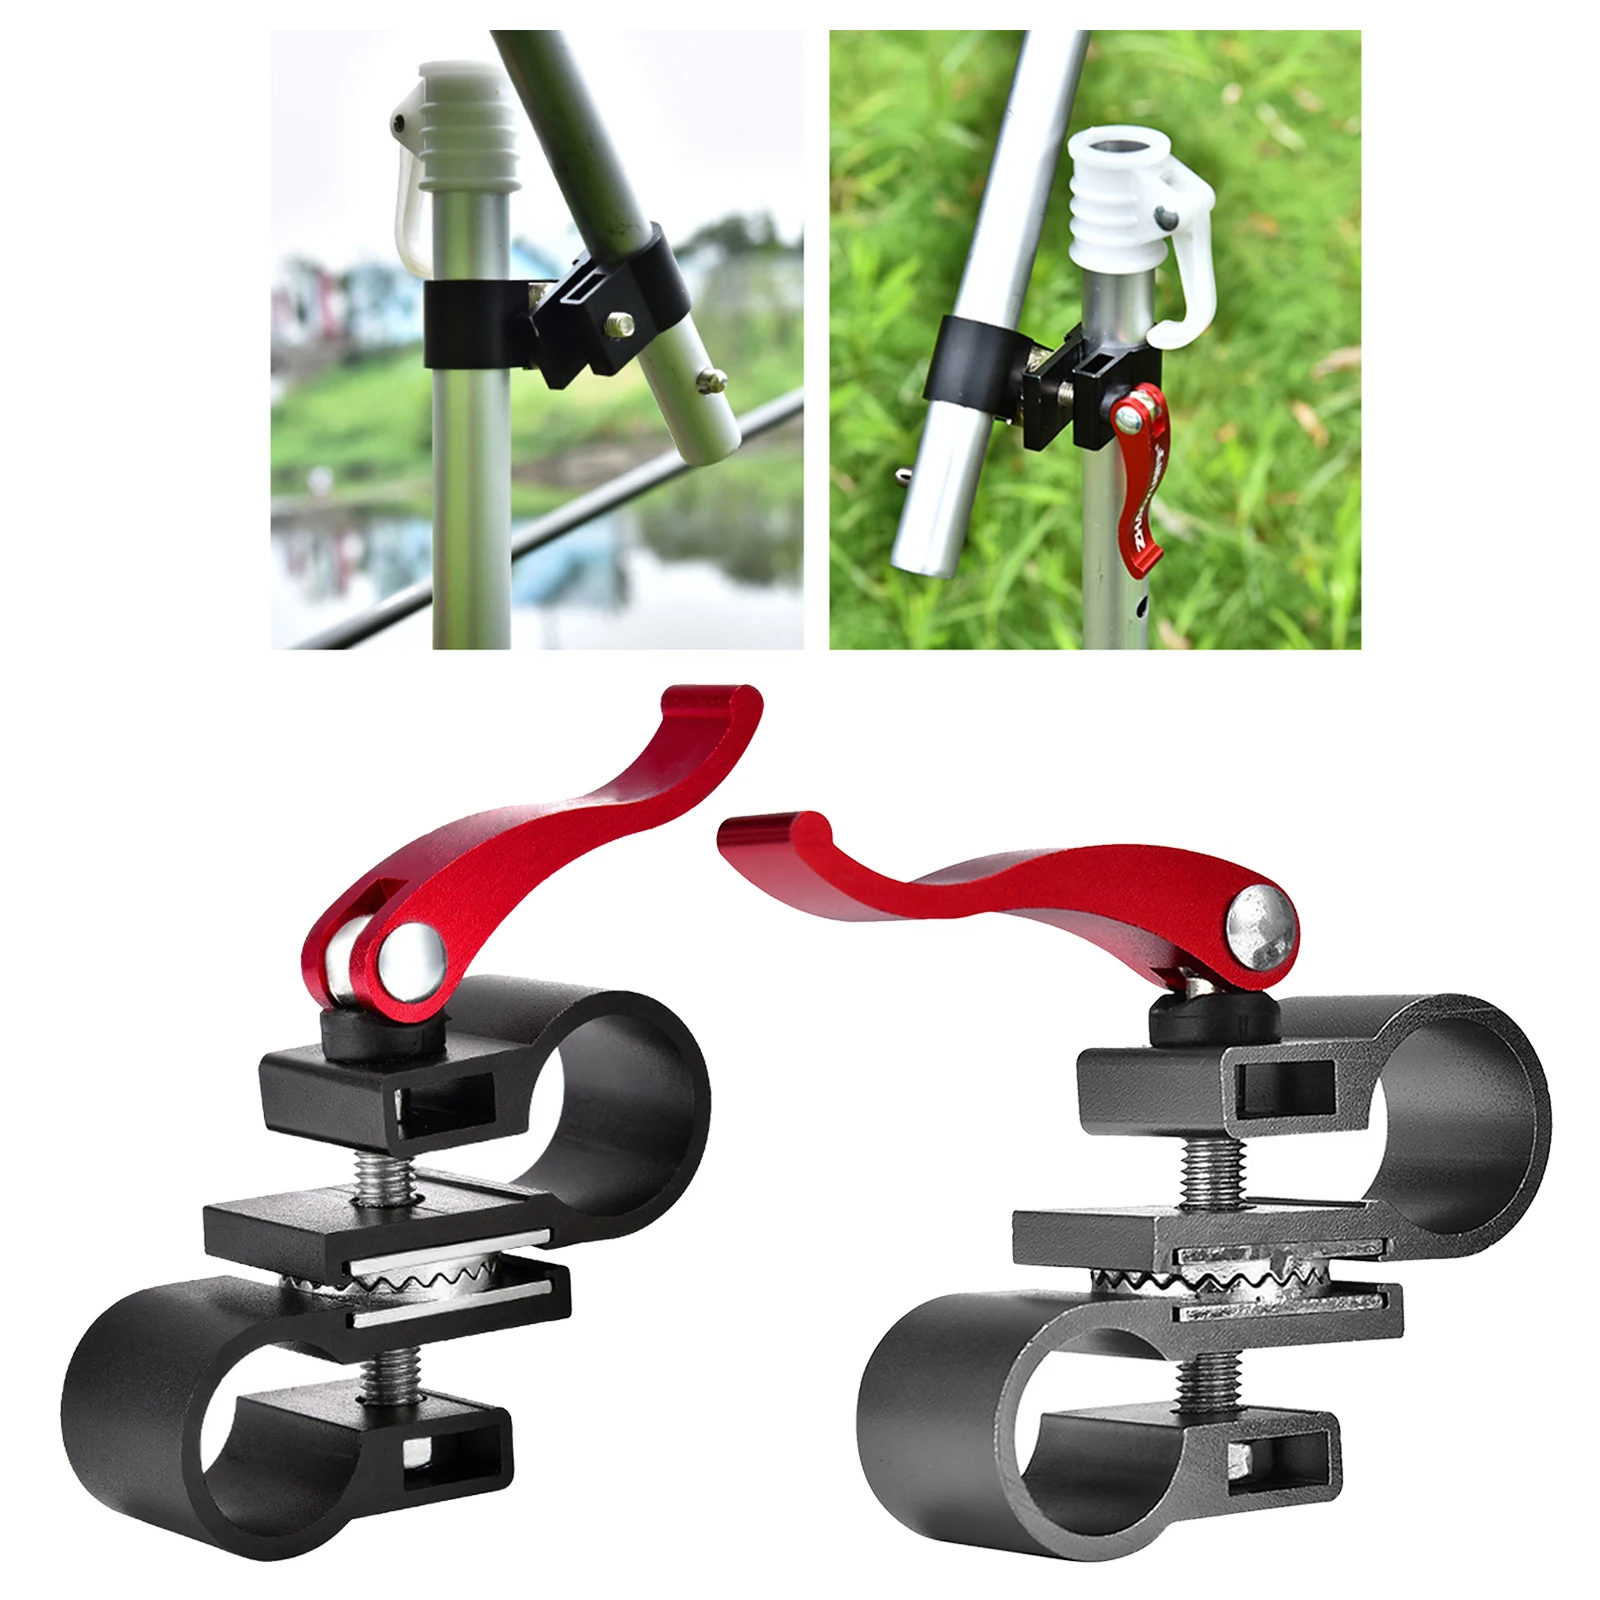 2X Fishing Chair Holder Umbrella Stand Clip Brackets Clamp Mount 